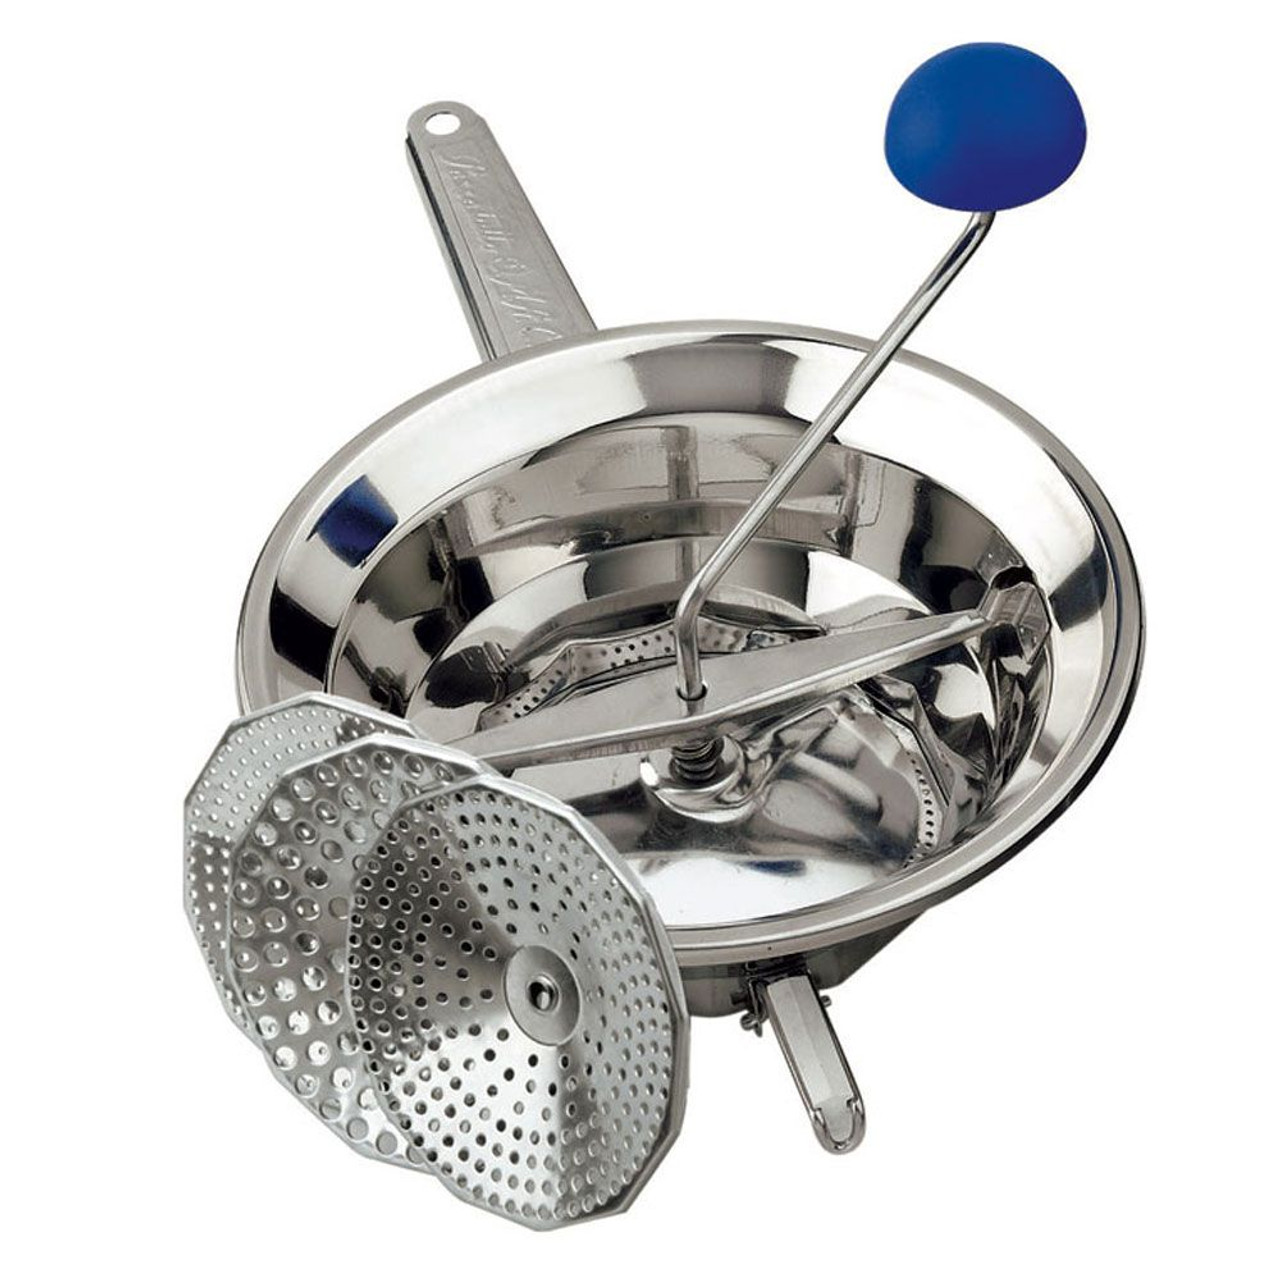 Stainless Steel Pastry Blender - Fante's Kitchen Shop - Since 1906